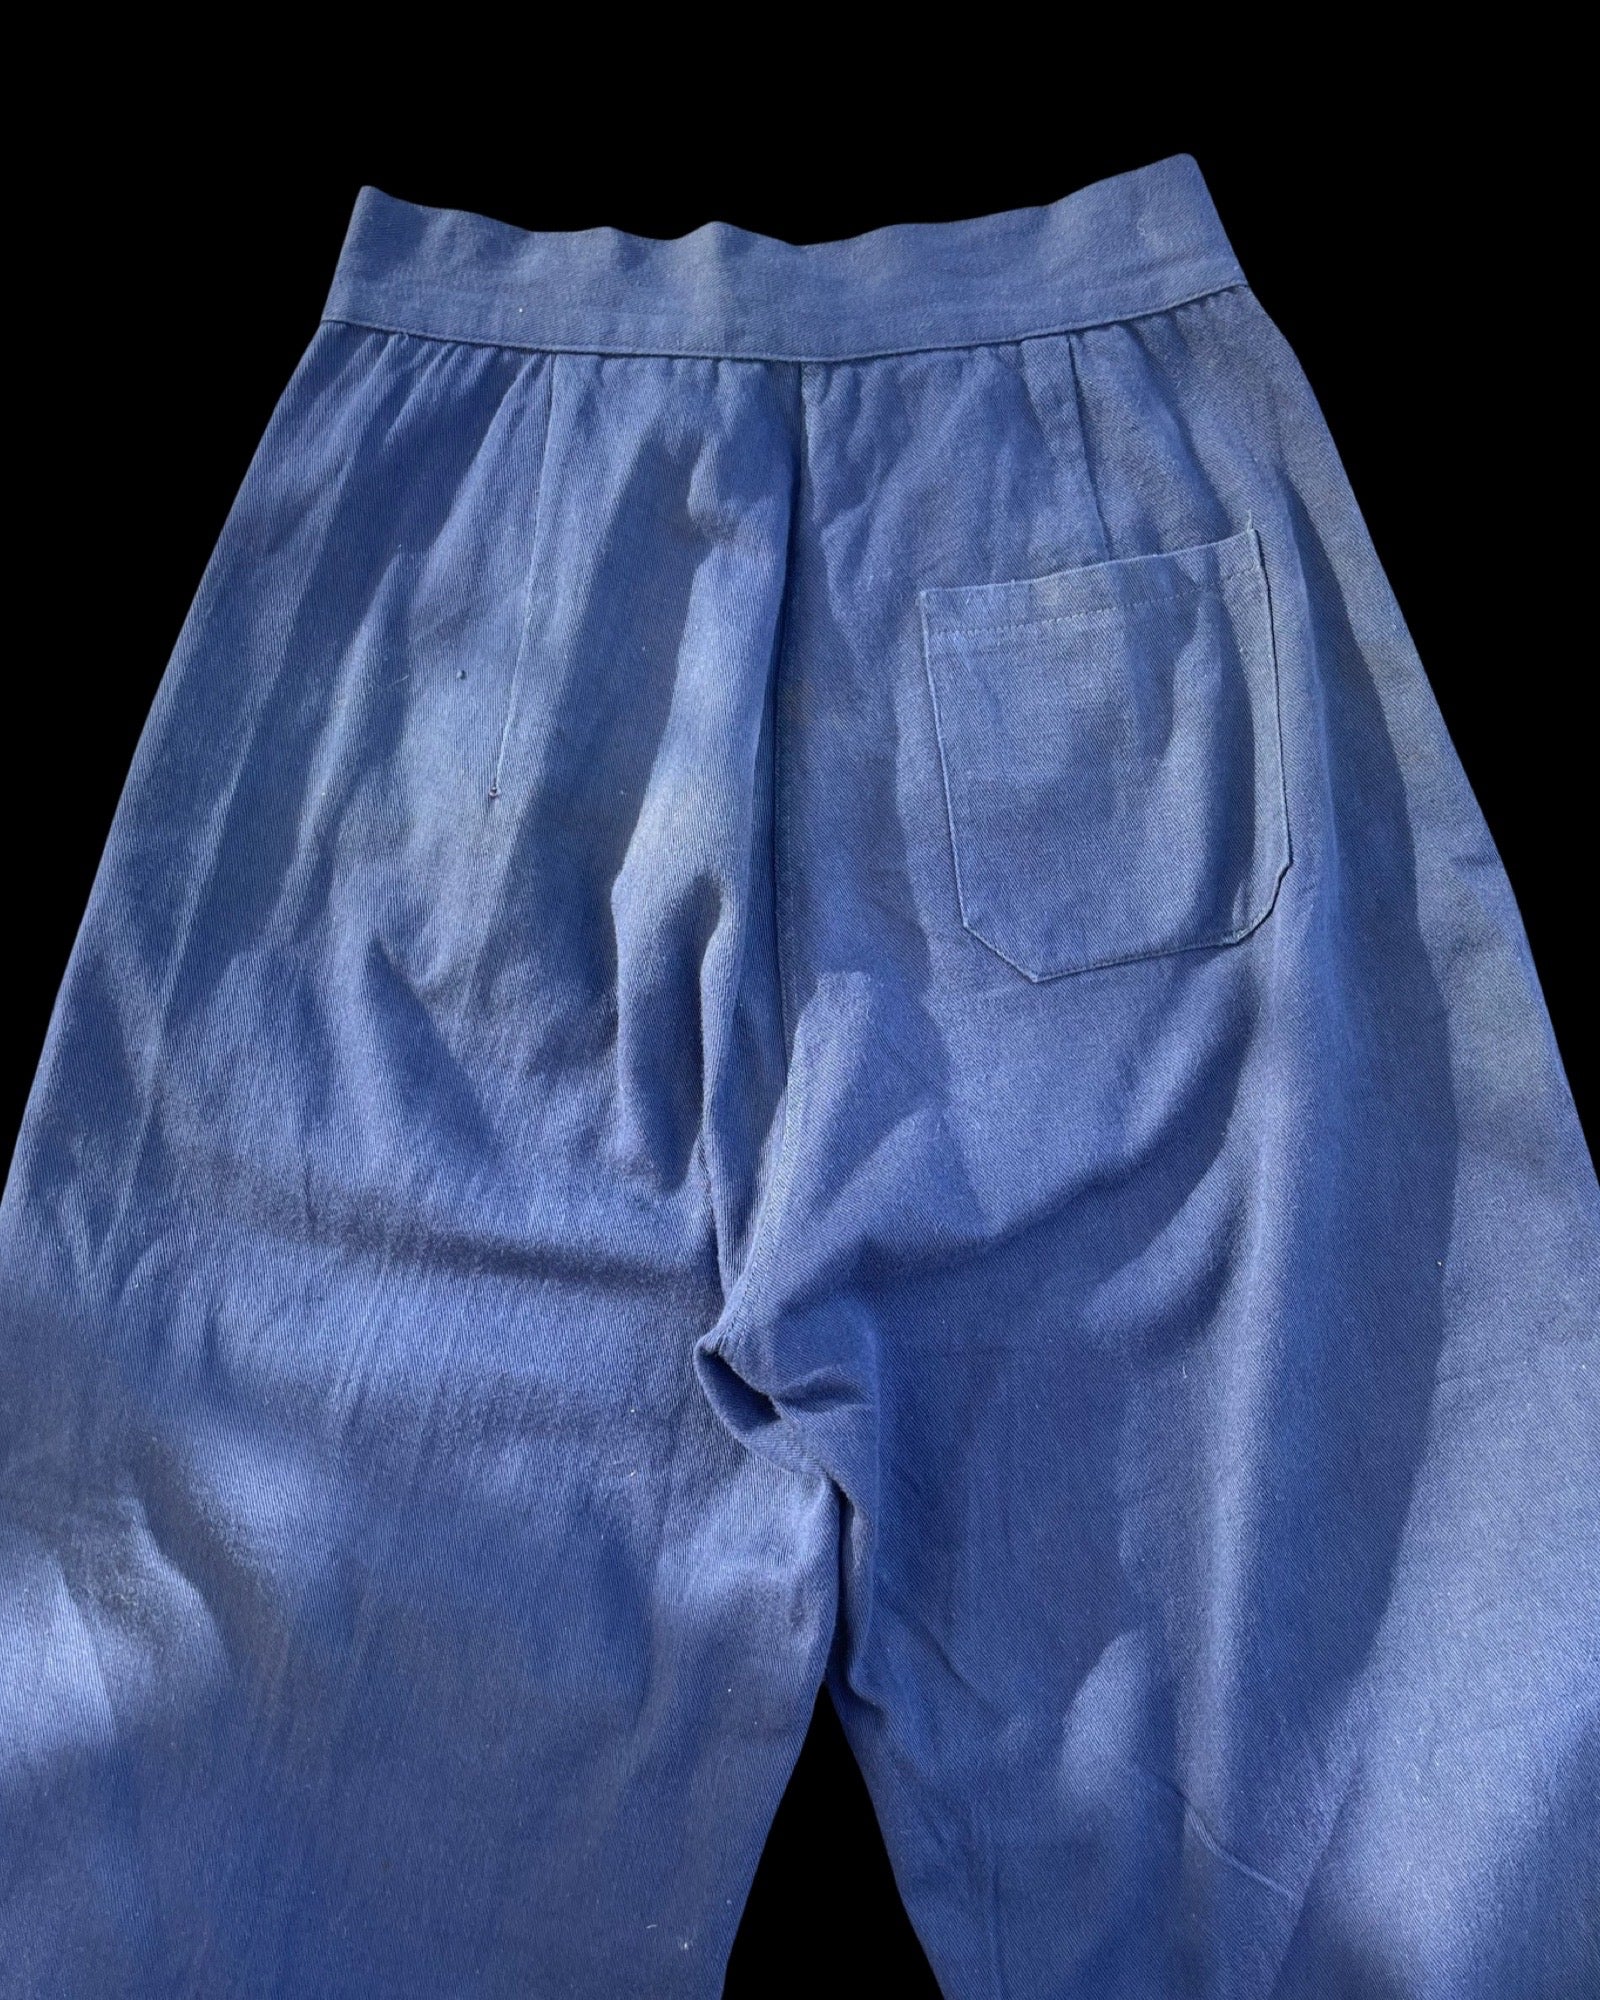 Rare 1930s Sportswear Fall Front Navy Cotton Twill Pants